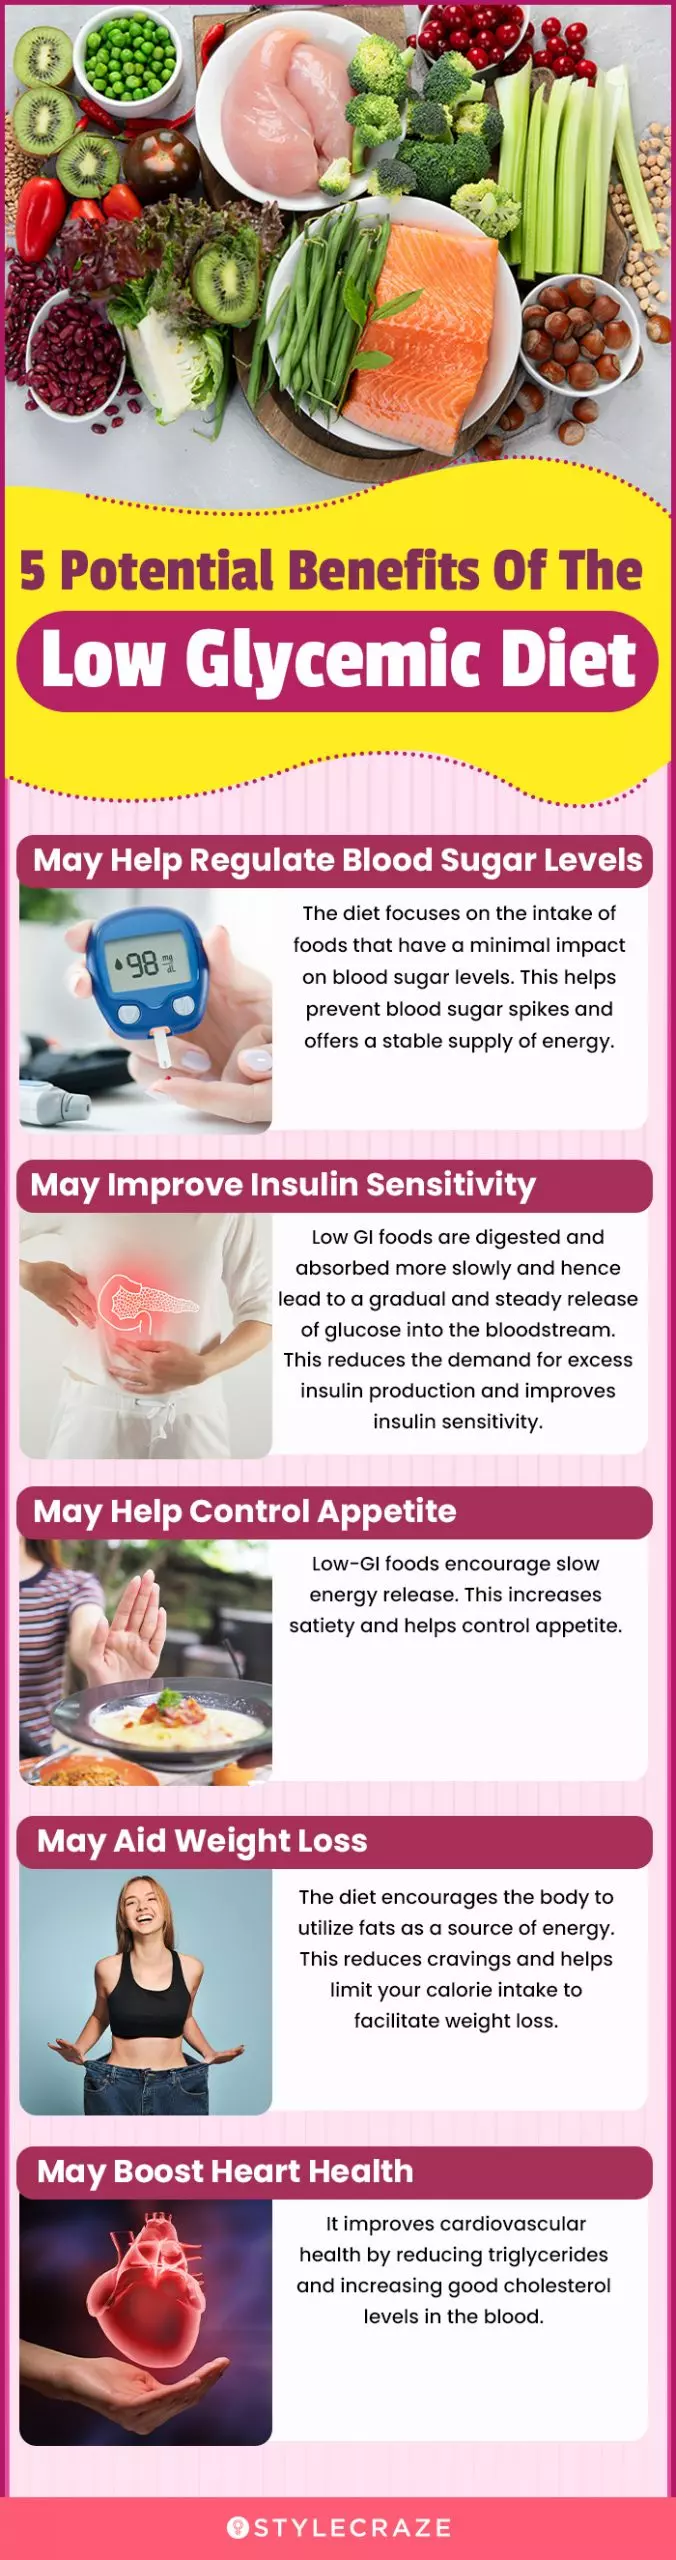 5 potential benefits of the low glycemic diet (infographic)